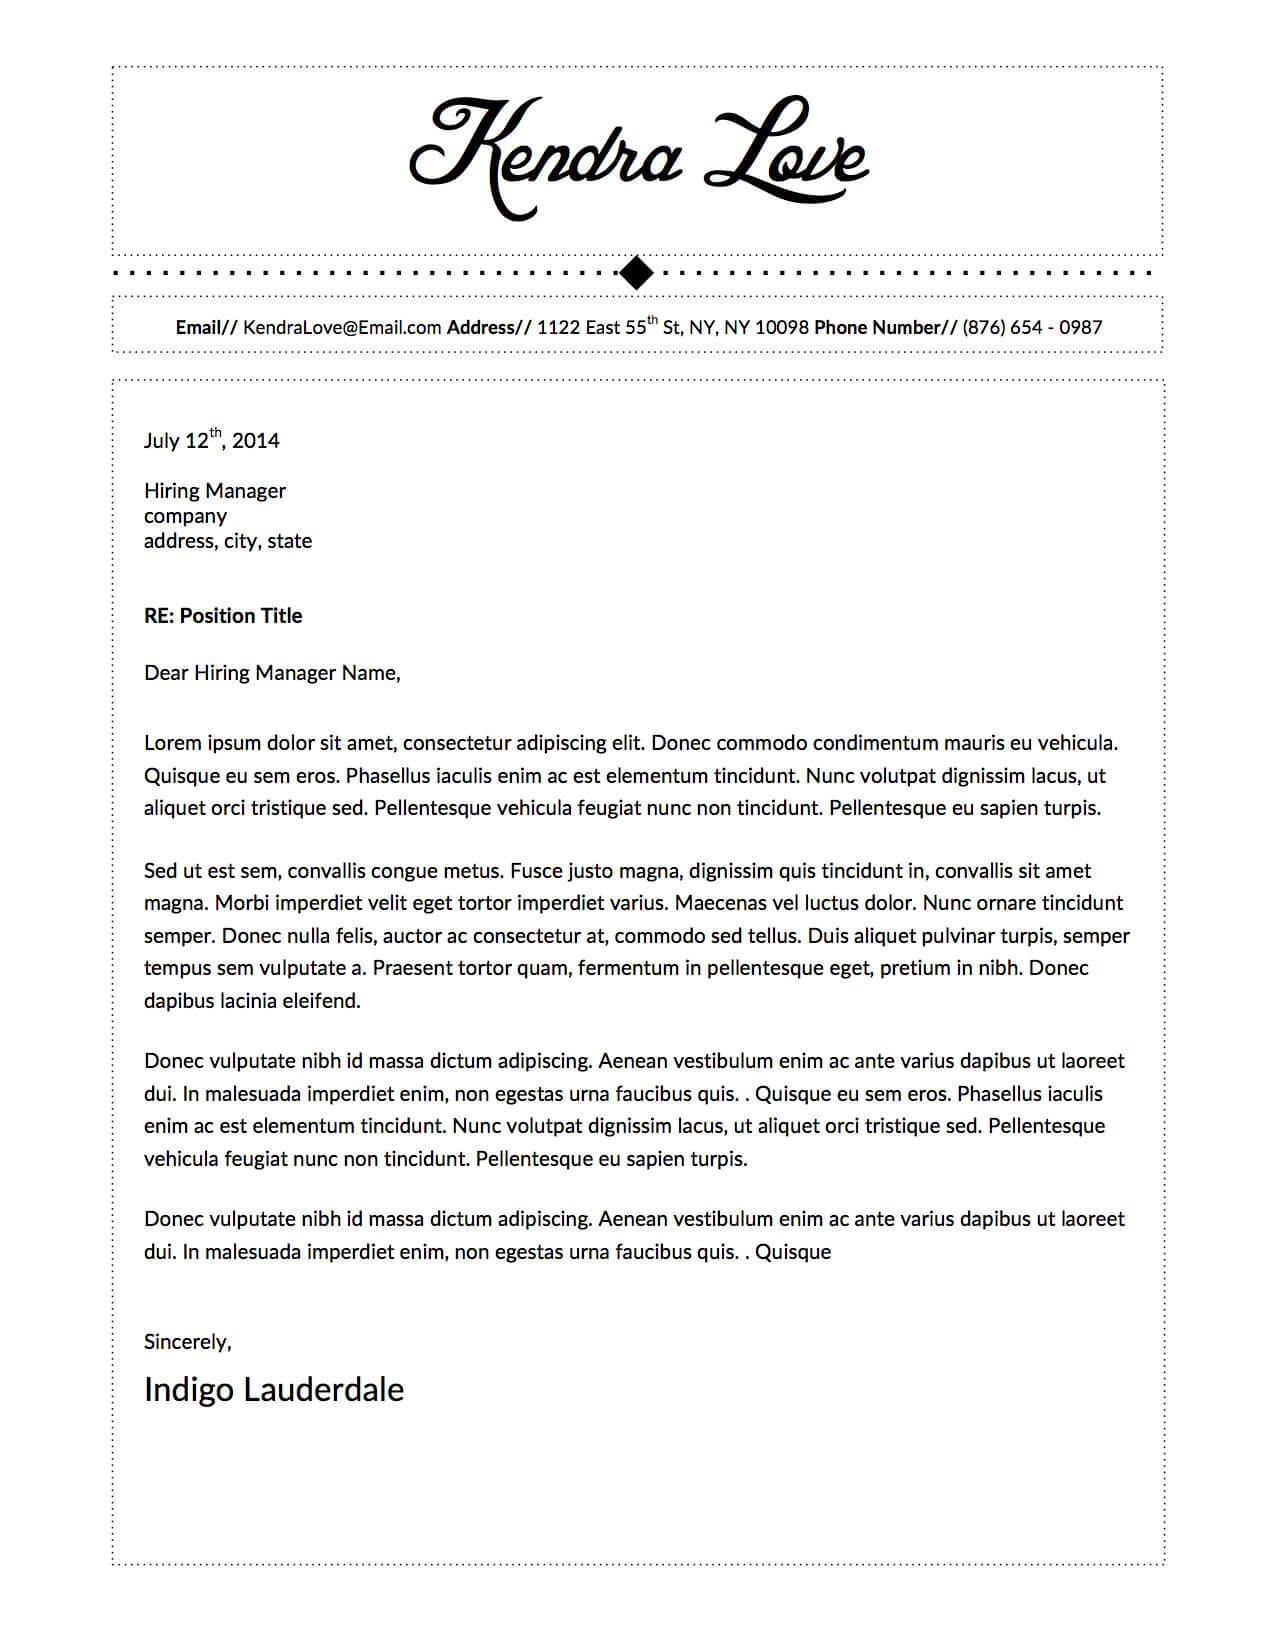 011 Letter Of Interest Template Microsoft Word Sweep11 Ideas Pertaining To Letter Of Interest Template Microsoft Word